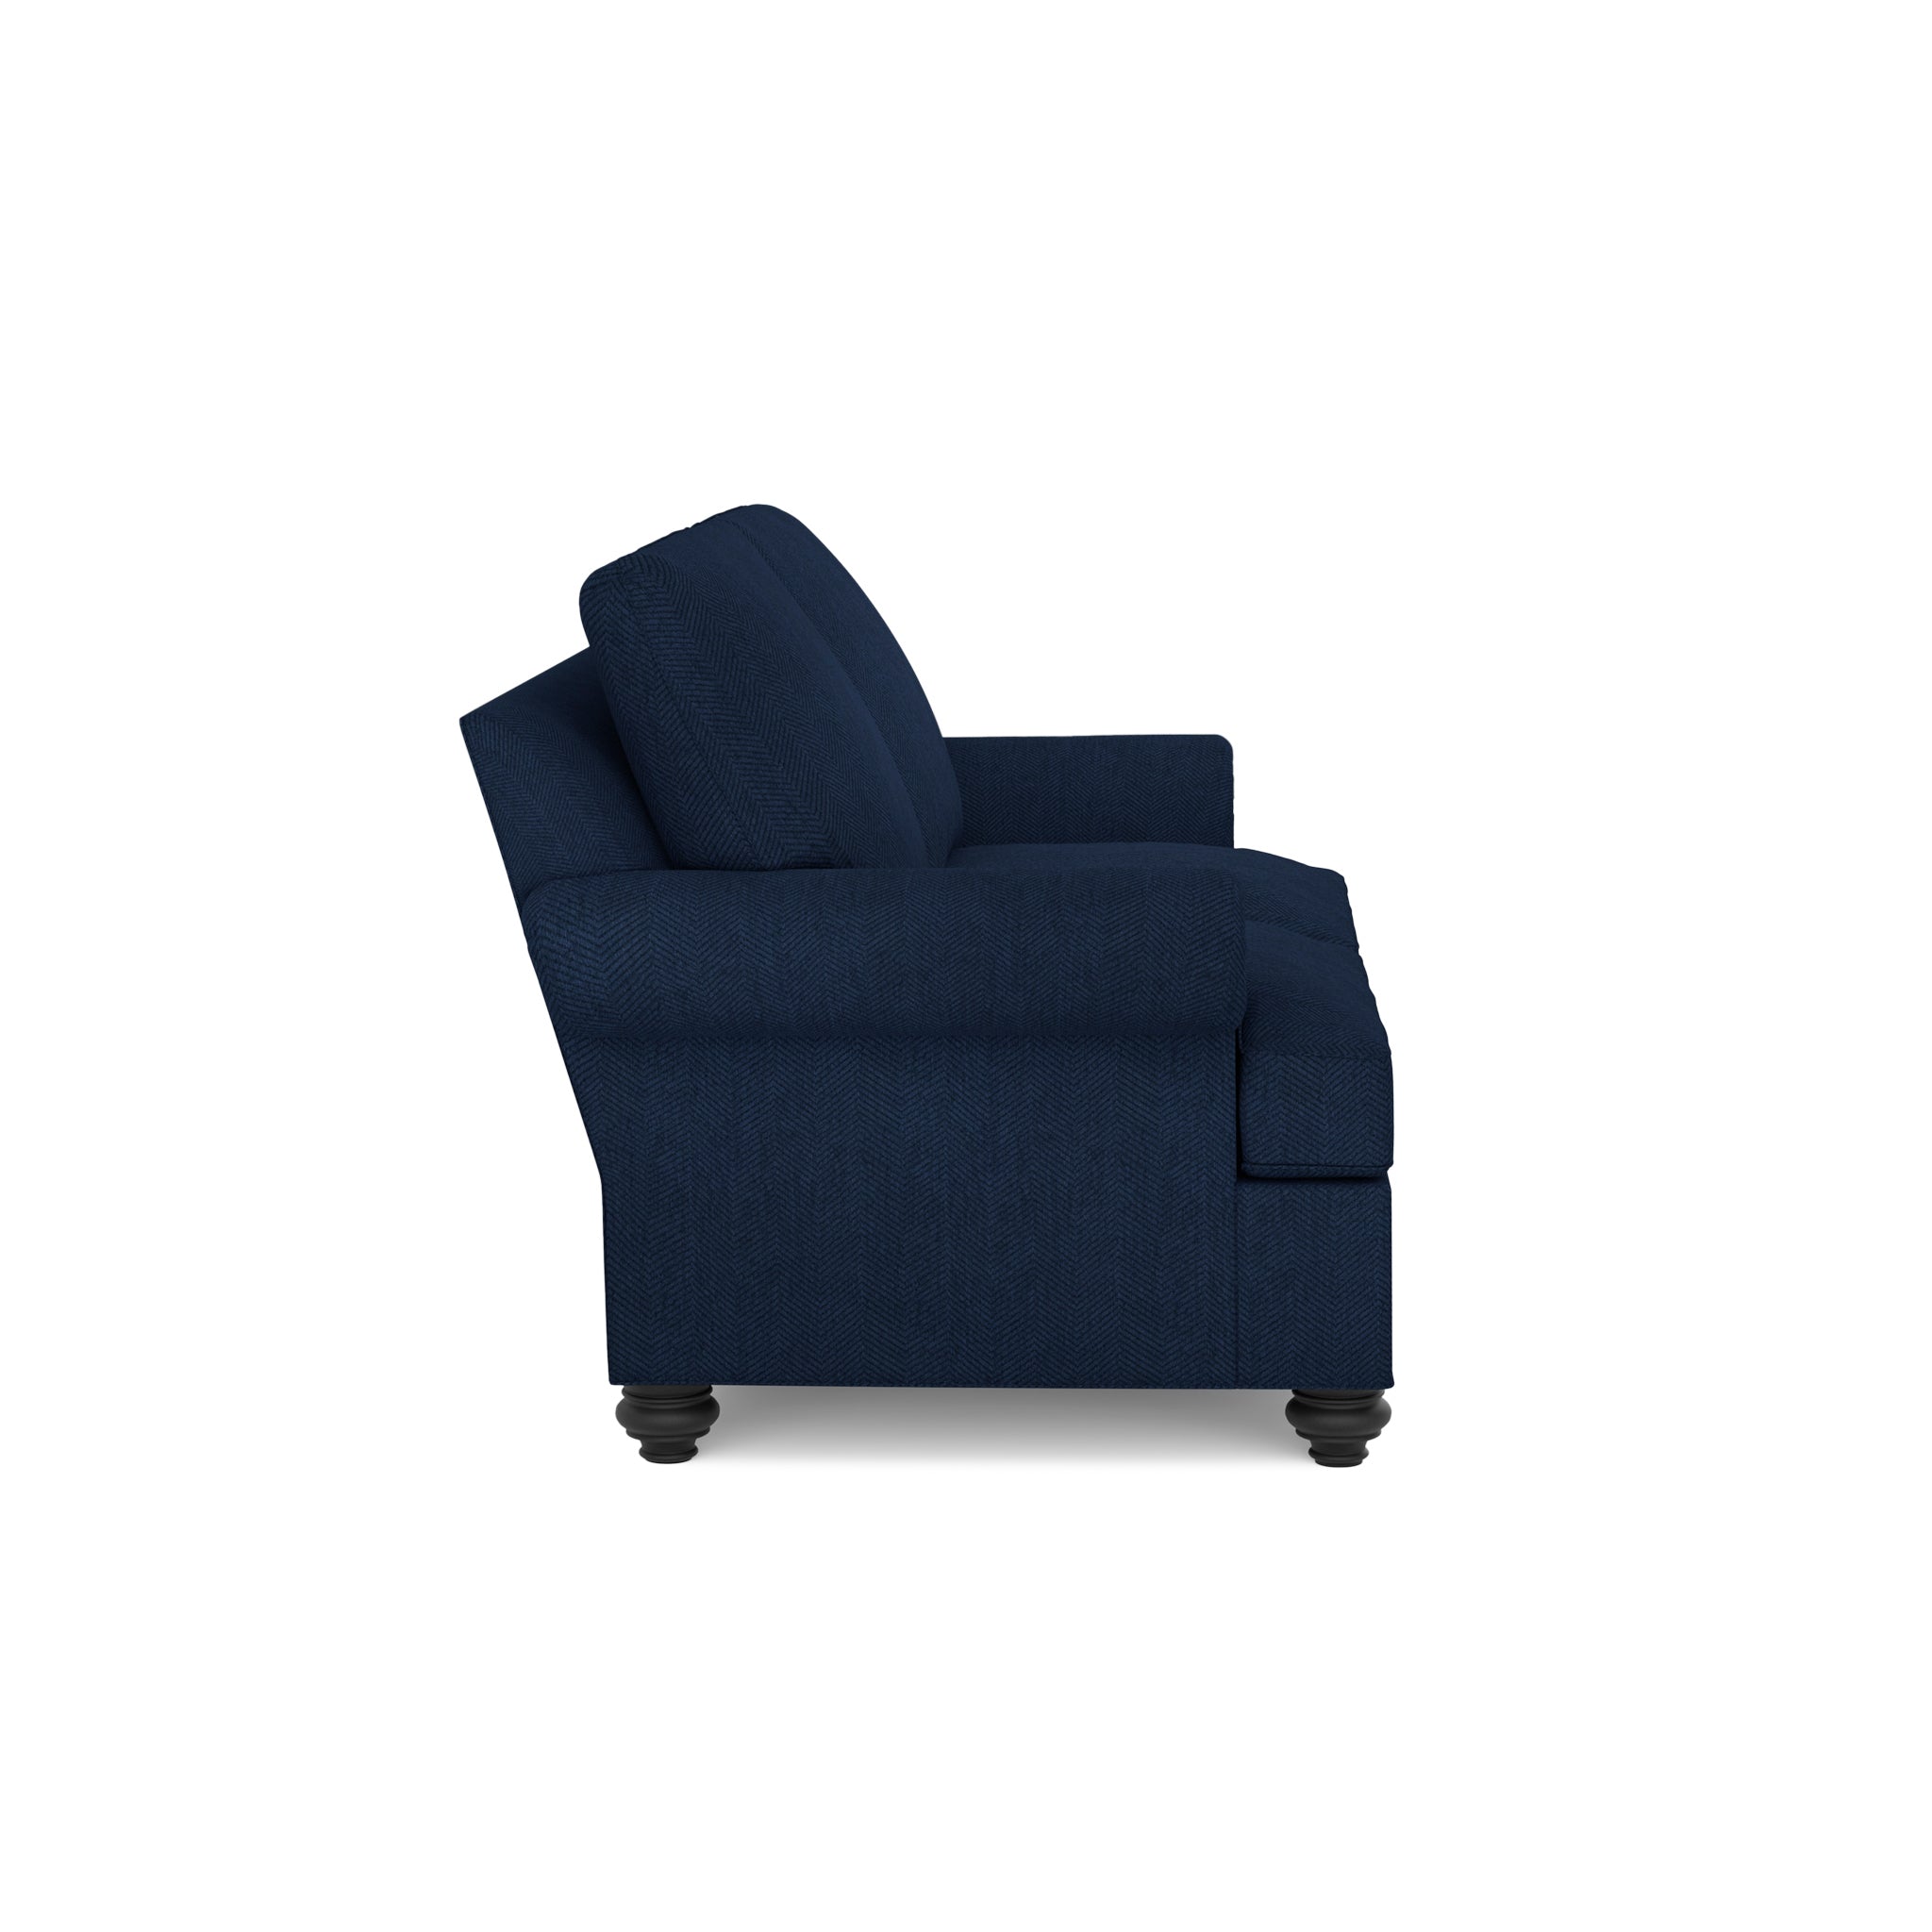 Woburn Manor Collection - Loveseat